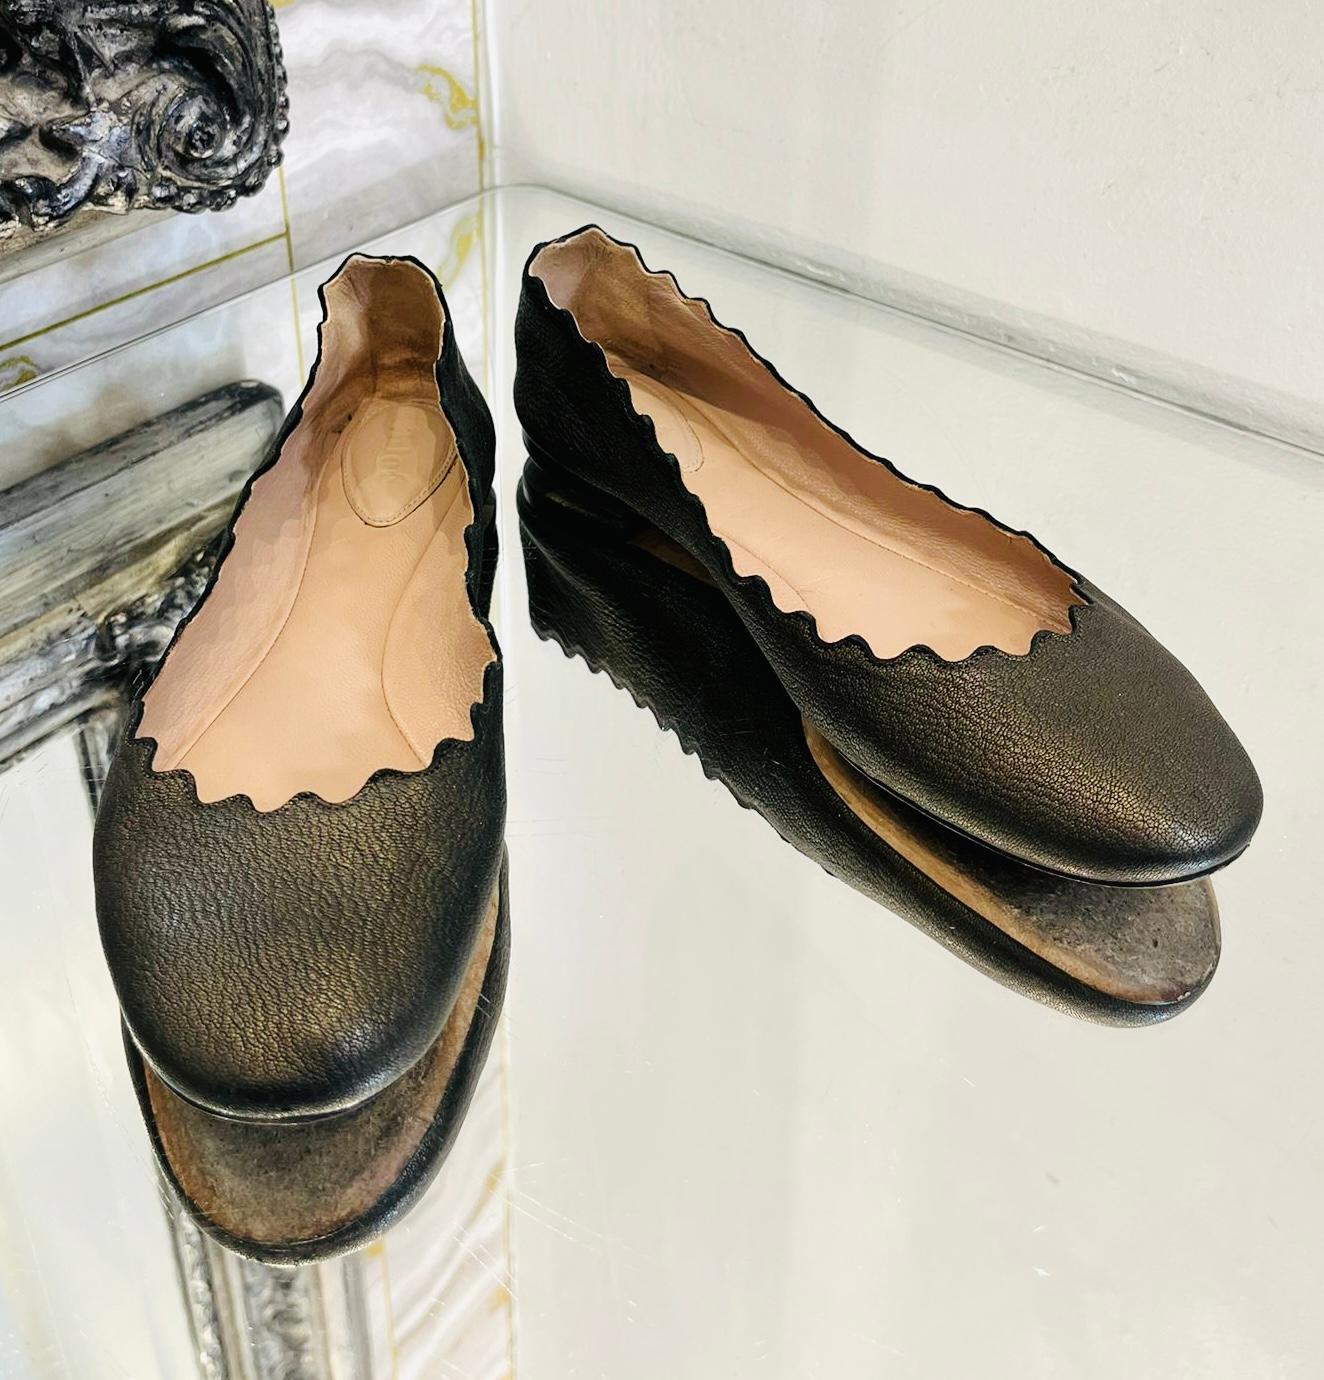 Chloe Leather Ballerina Flats In Good Condition For Sale In London, GB